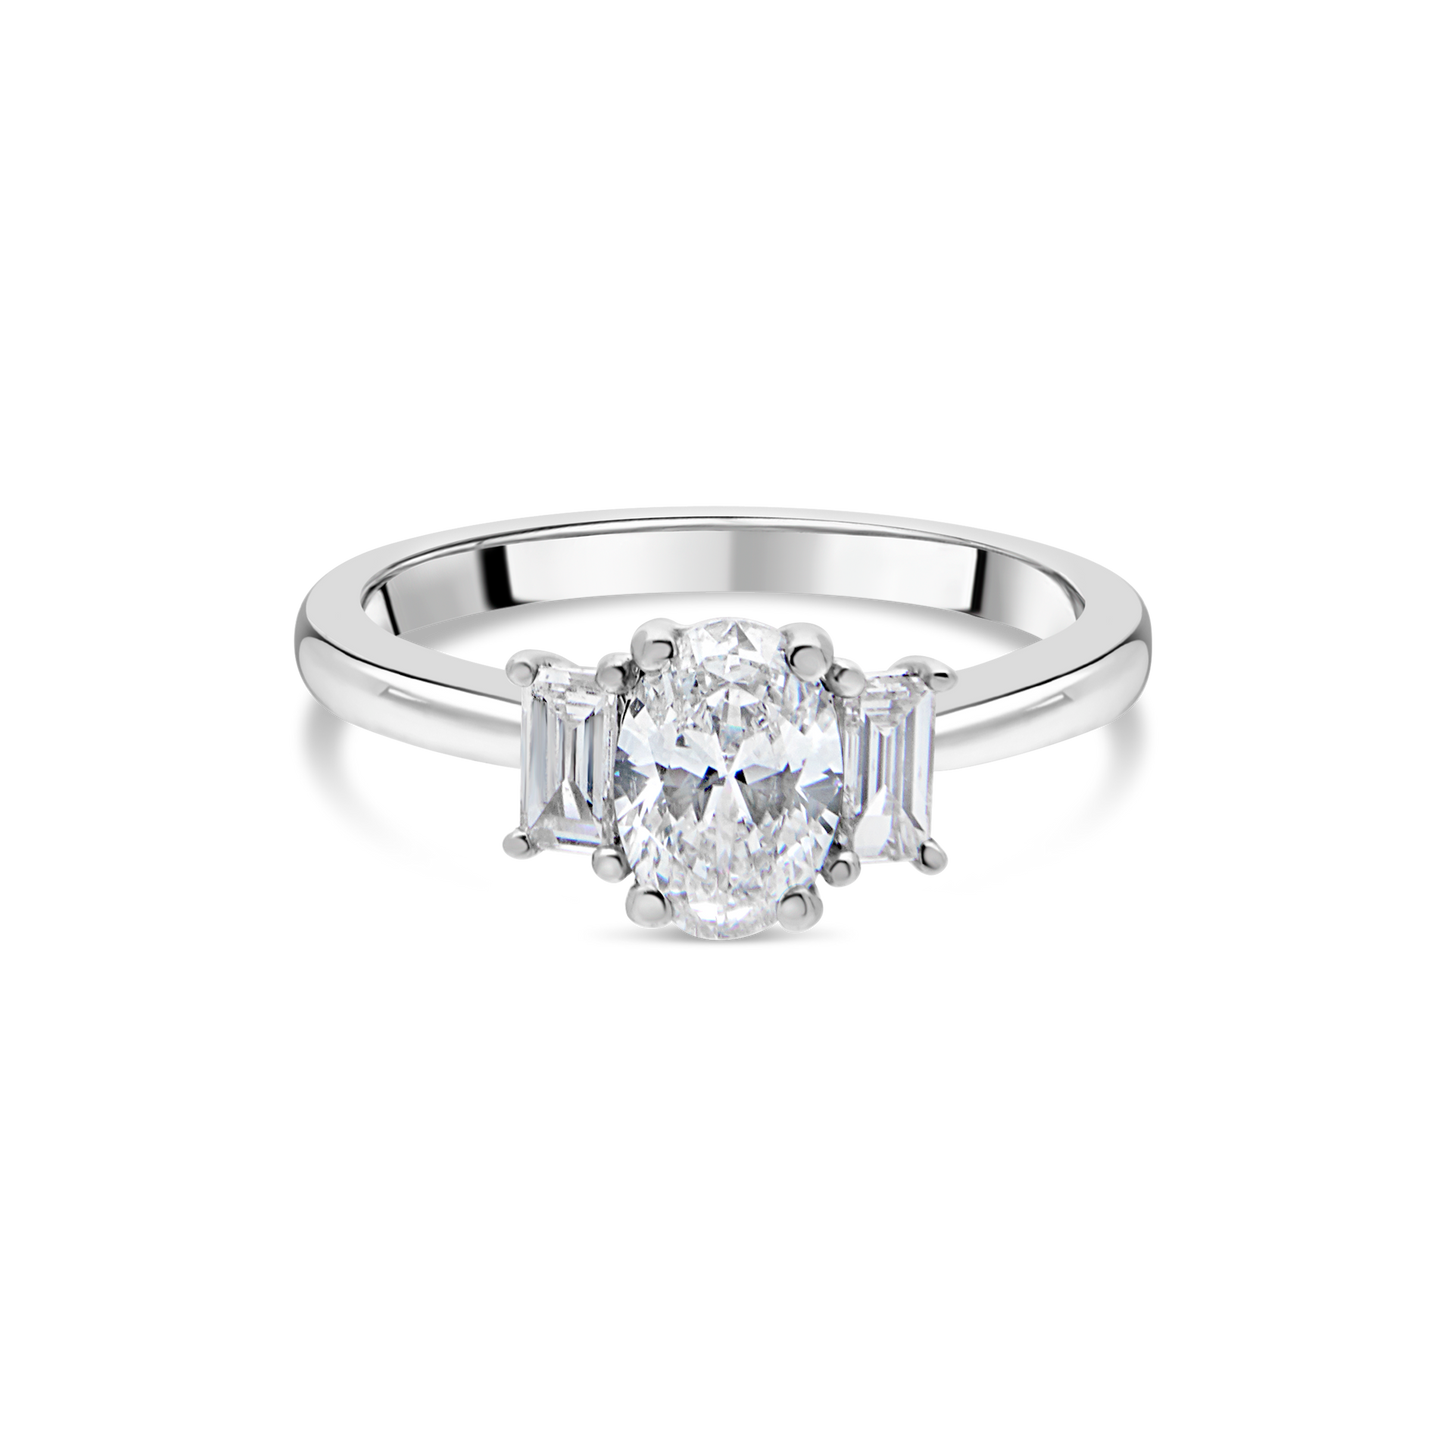 The "Tulip" with Oval Diamond and Baguettes, Platinum